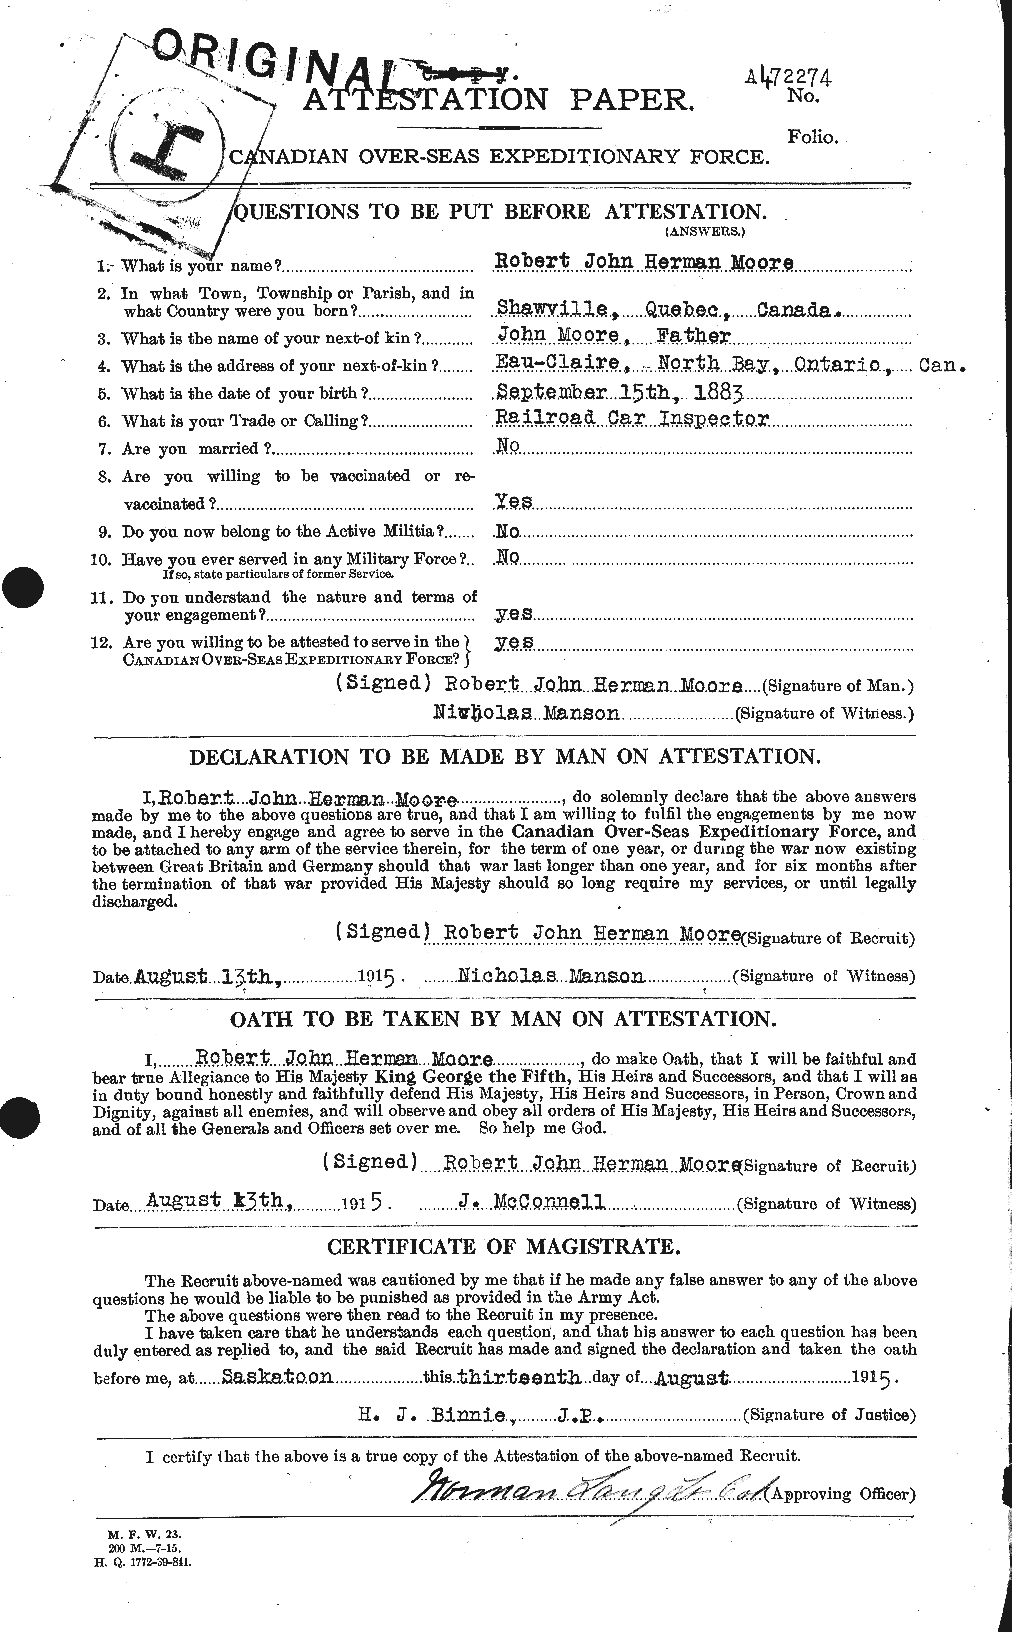 Personnel Records of the First World War - CEF 503579a